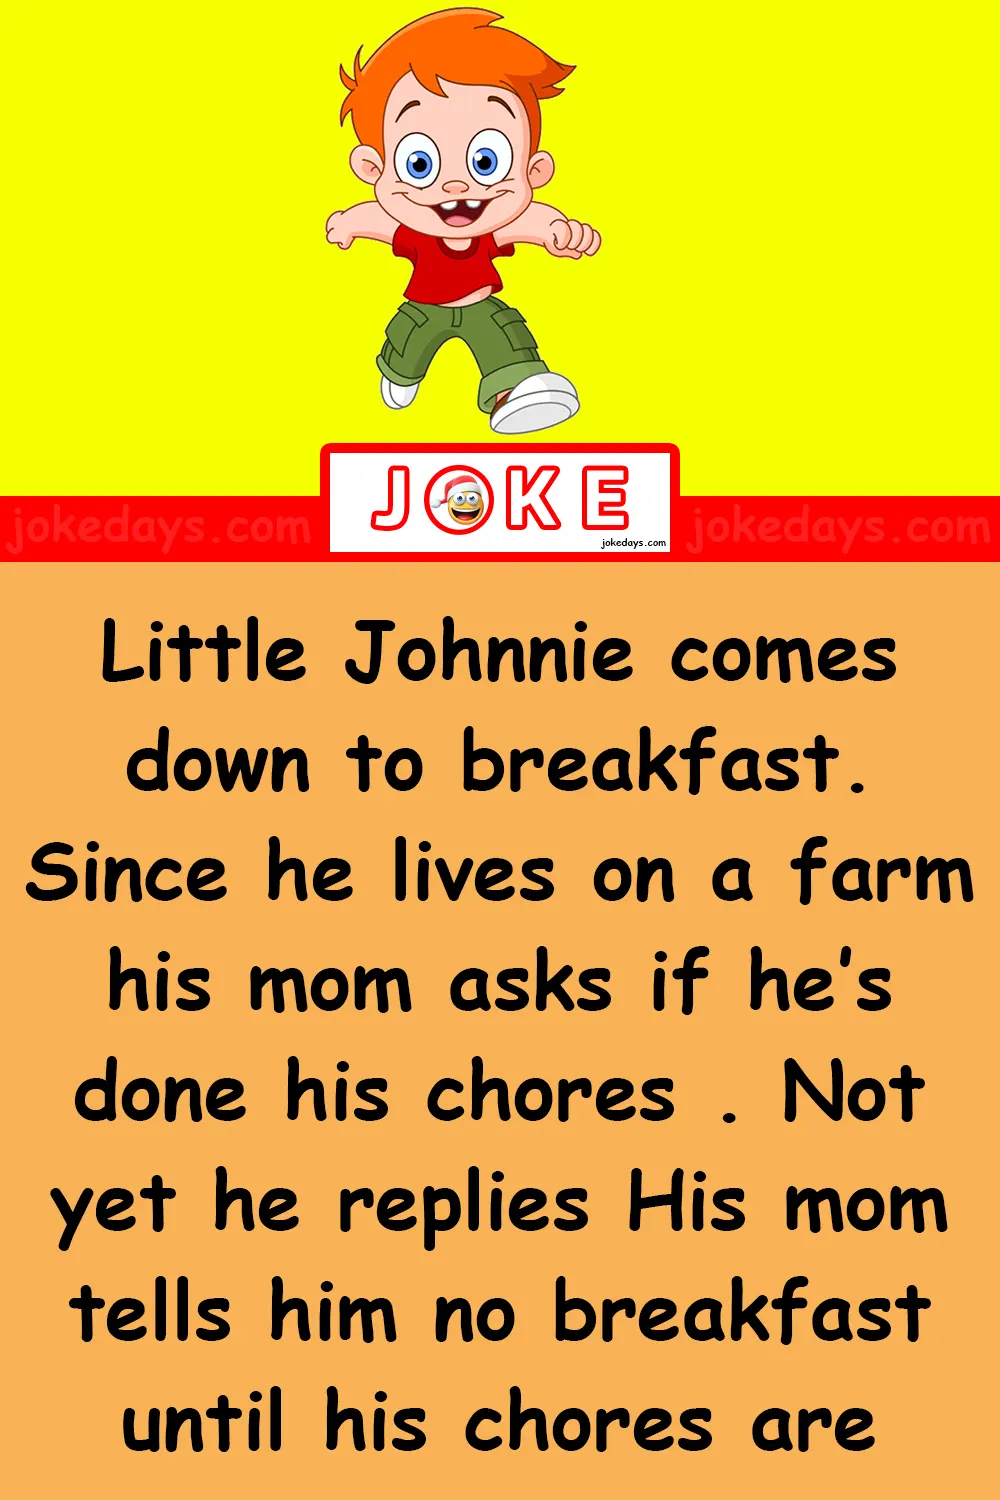 Little Johnnie comes down to breakfast